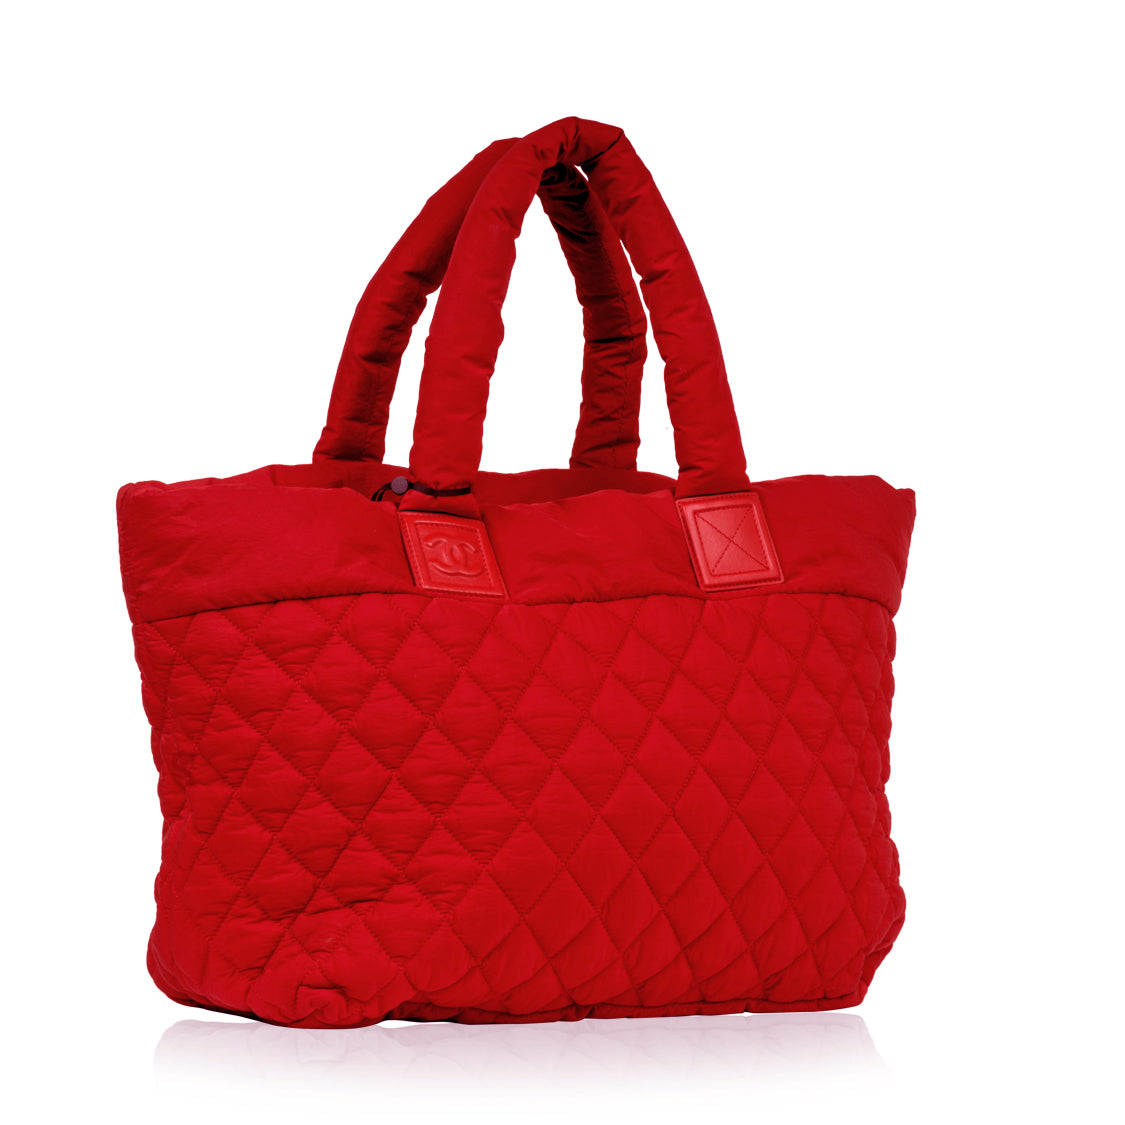 Chanel - Coco Cocoon Tote Bag - Pre-Loved - Red